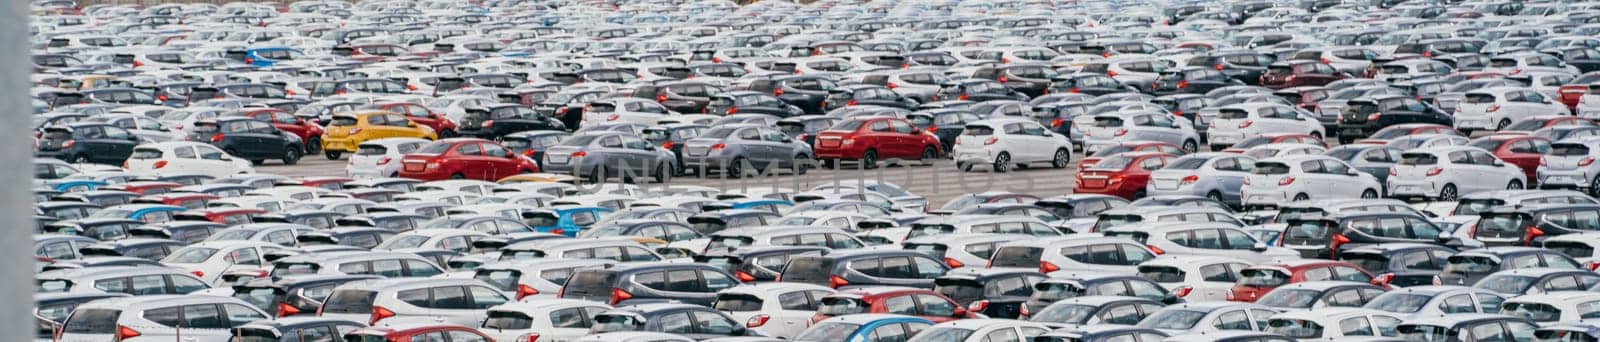 Lamchabang, Thailand - July 02, 2023 Amidst a car factory's distribution center, new sedans fill rows under the suna view from above showcases the crowded parking, a hub of global marketing.